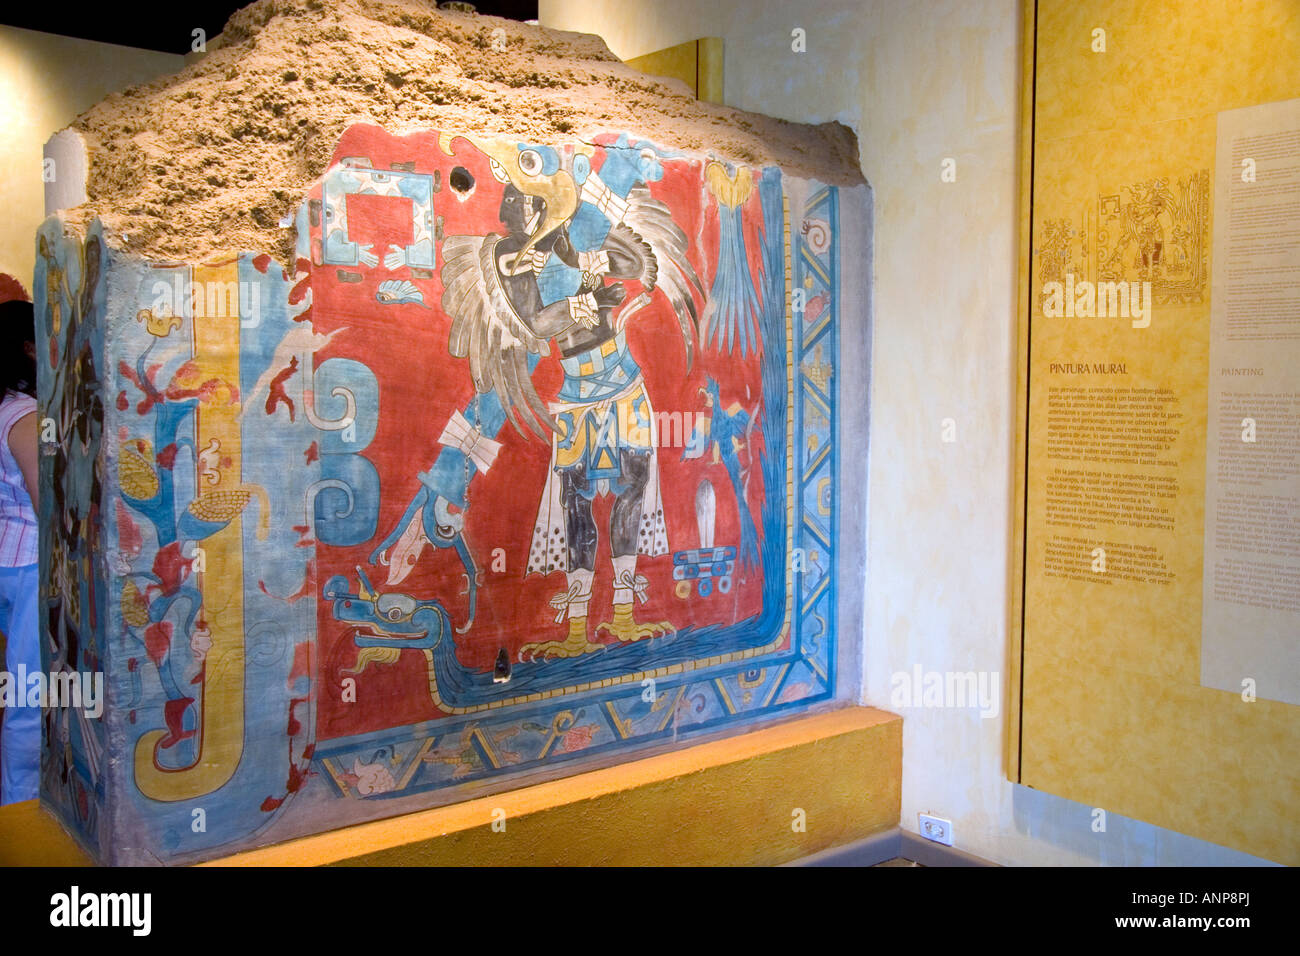 Pintura mural eagle man artifact from Teotihuacan on display at the National Museum of Anthropology in Mexico City Mexico Stock Photo